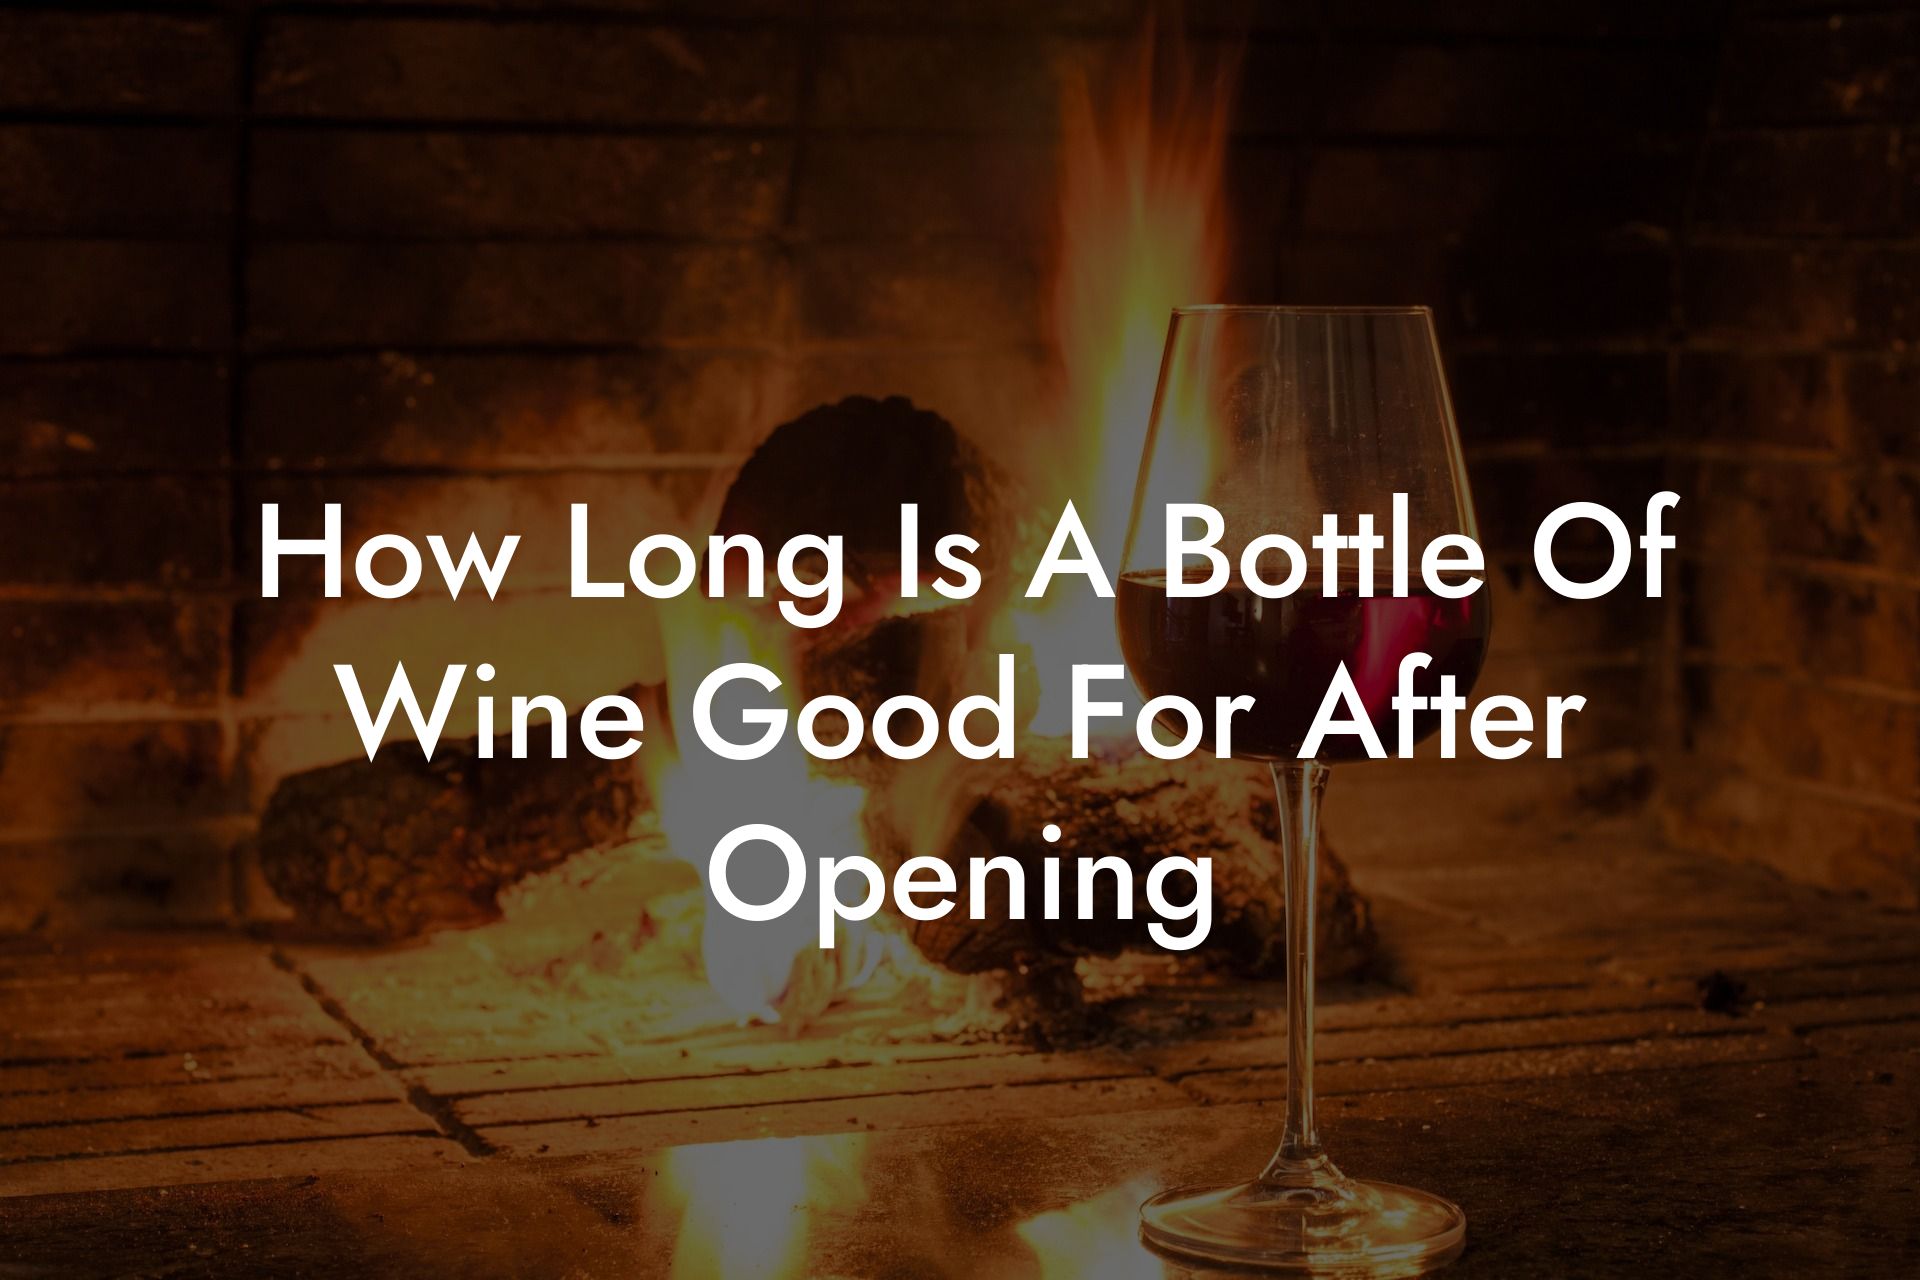 How Long Is A Bottle Of Wine Good For After Opening